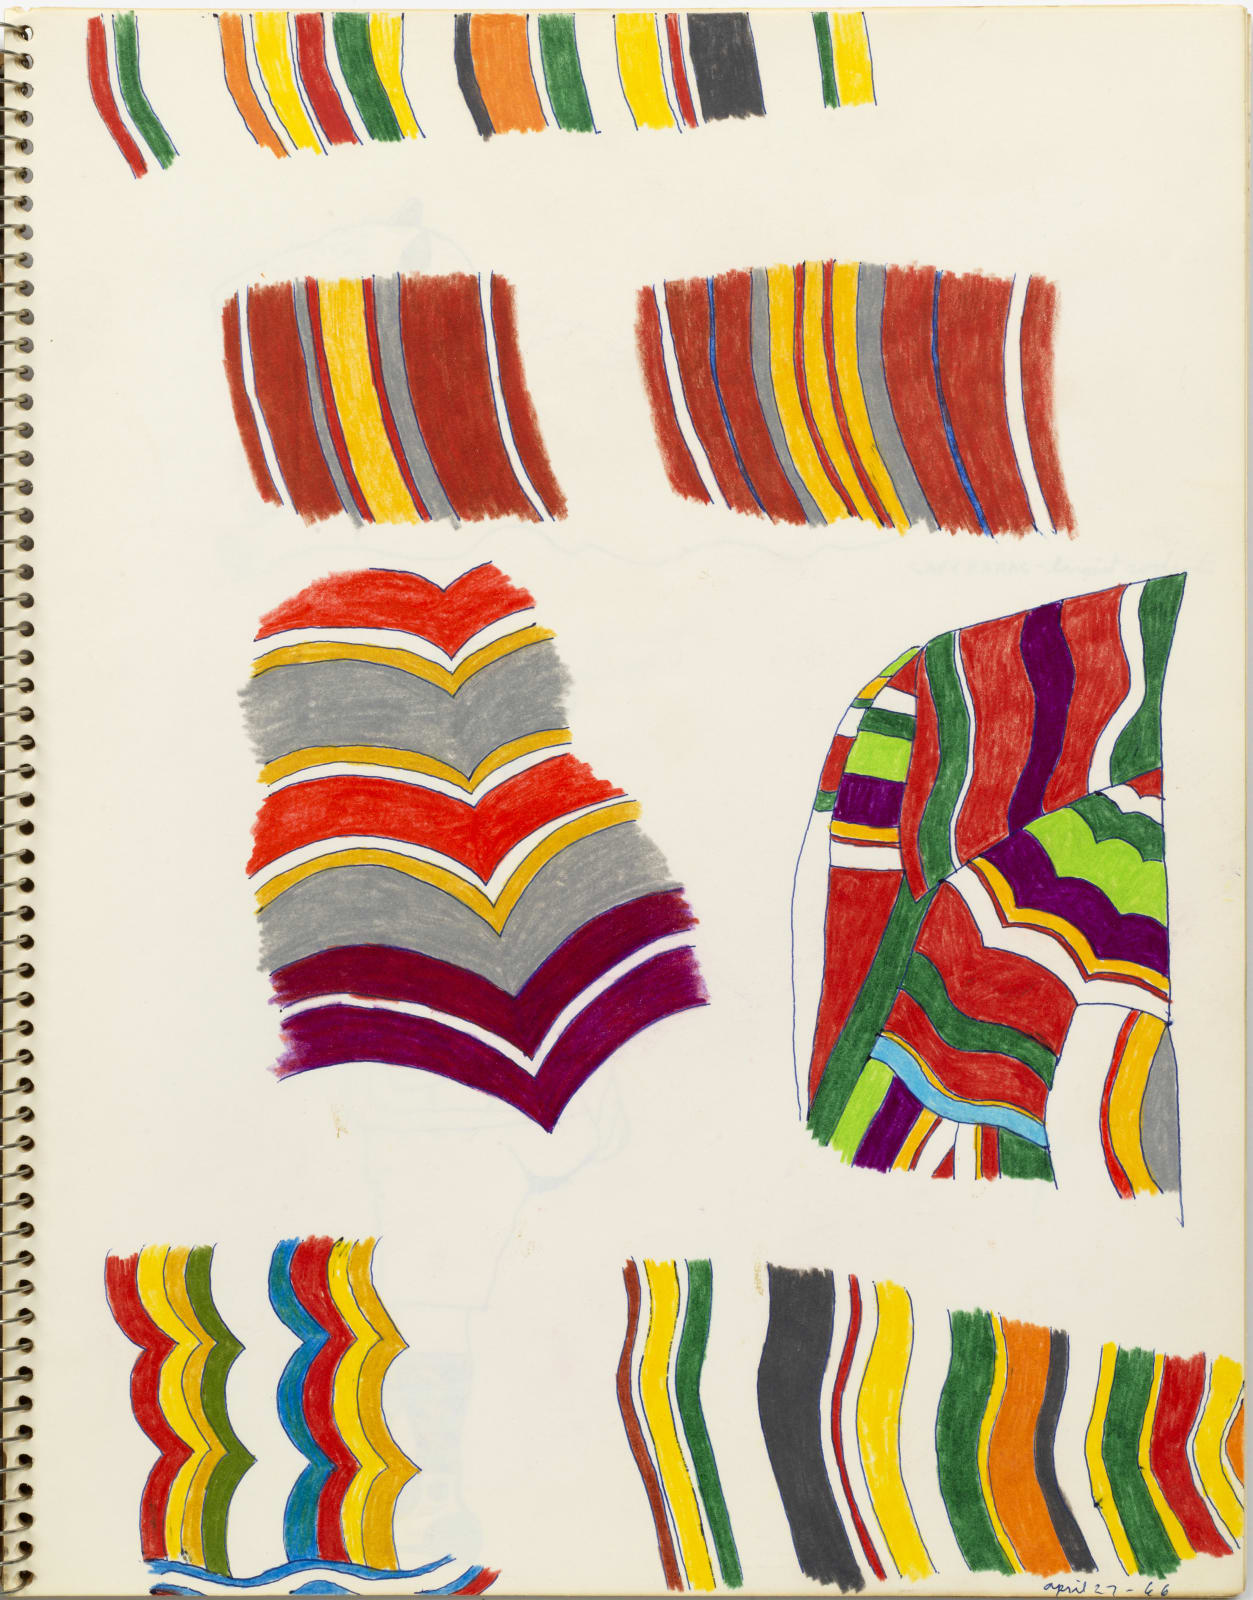 Untitled, April 27, 1966, colored pencil and ball-point pen on sketchbook paper, 14 x 11 inches